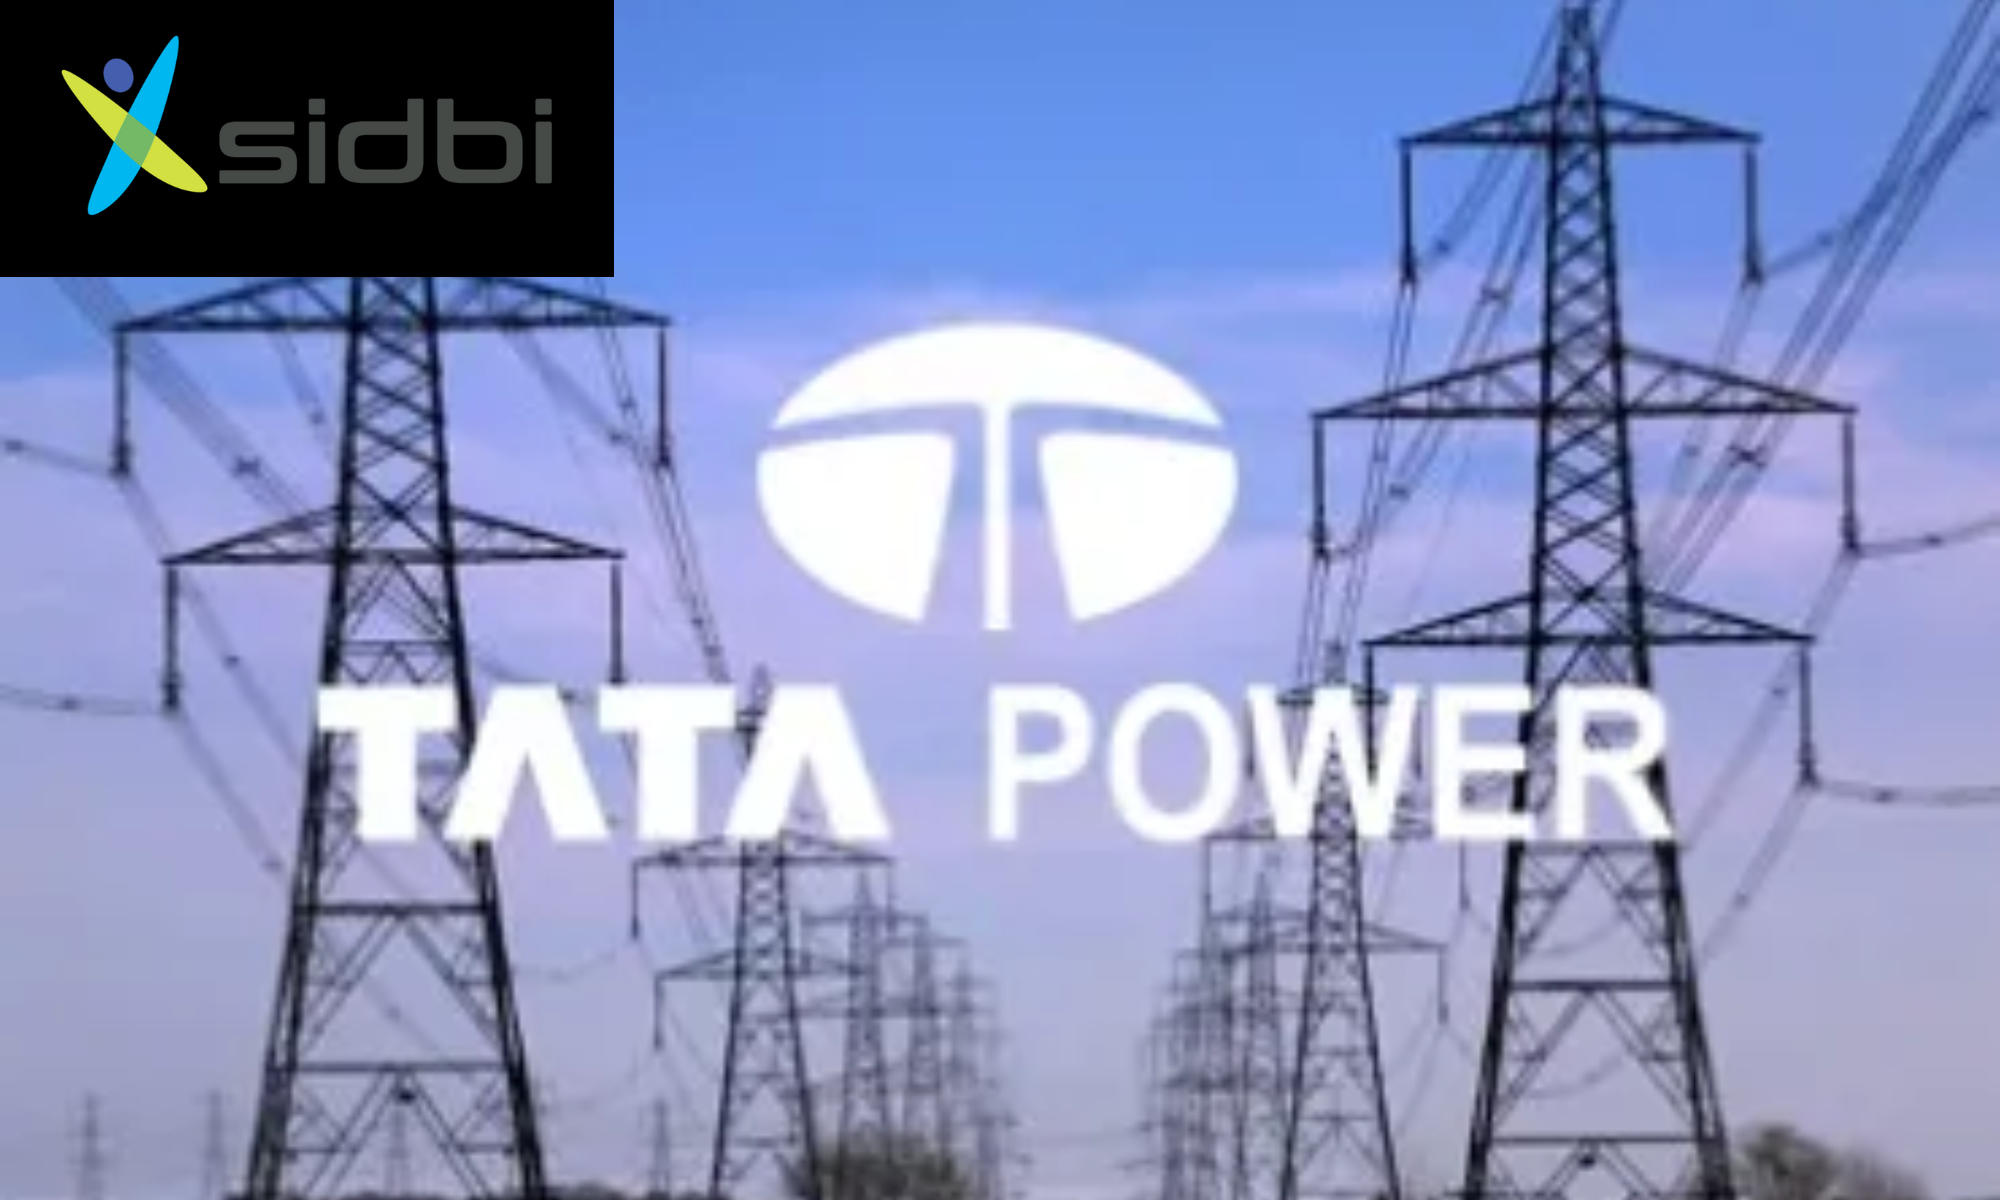 SIDBI and Tata Power's TPRMG collaborated to support green entrepreneurs_50.1